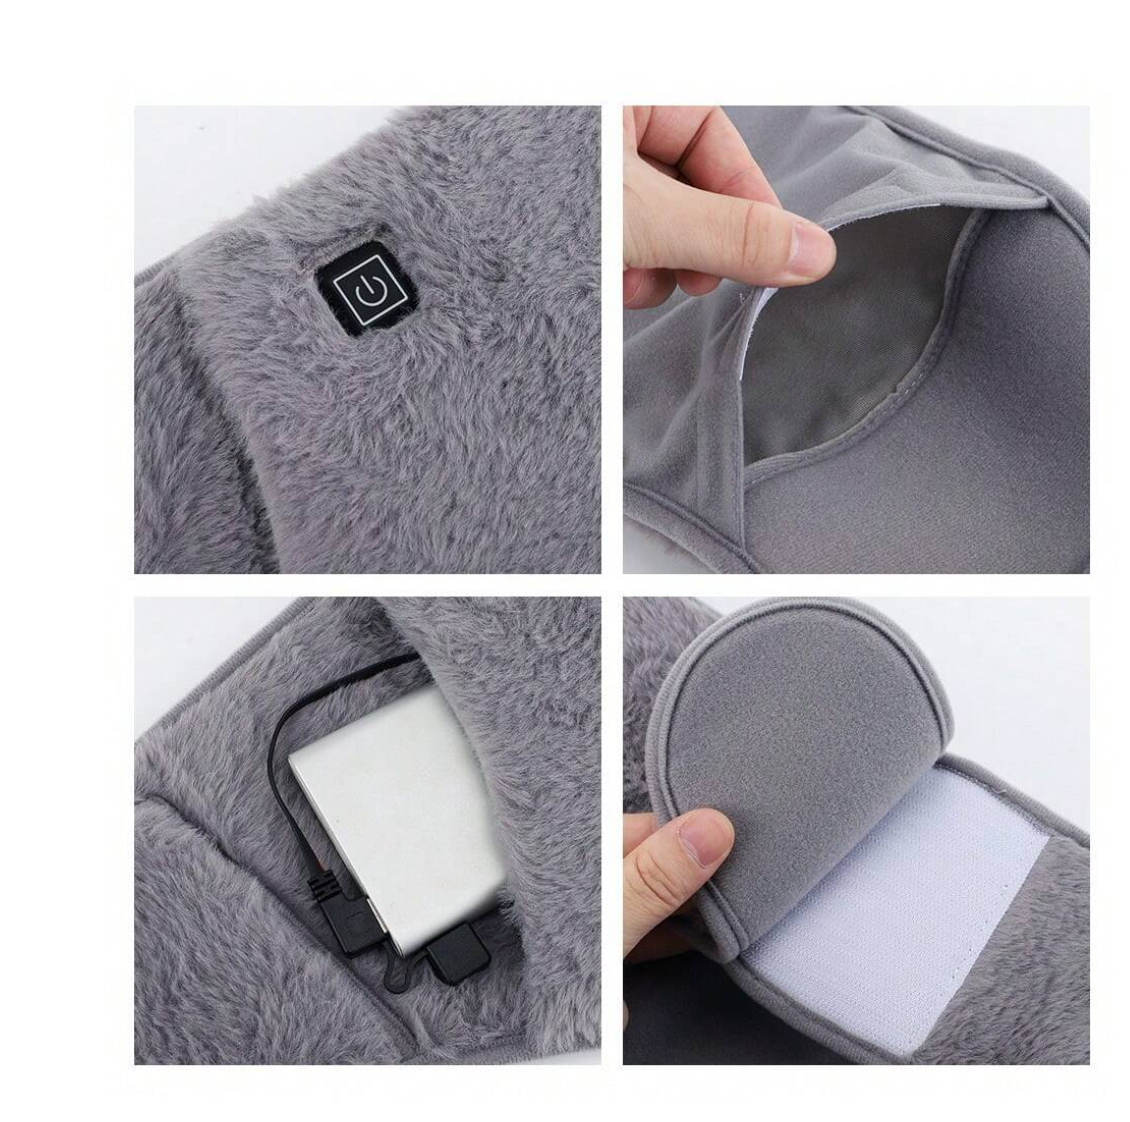 On-the-Go Warmth: Portable Cordless Heating Pad with Graphene Technology for Women and Girls – Fast, Versatile, and USB Rechargeable!